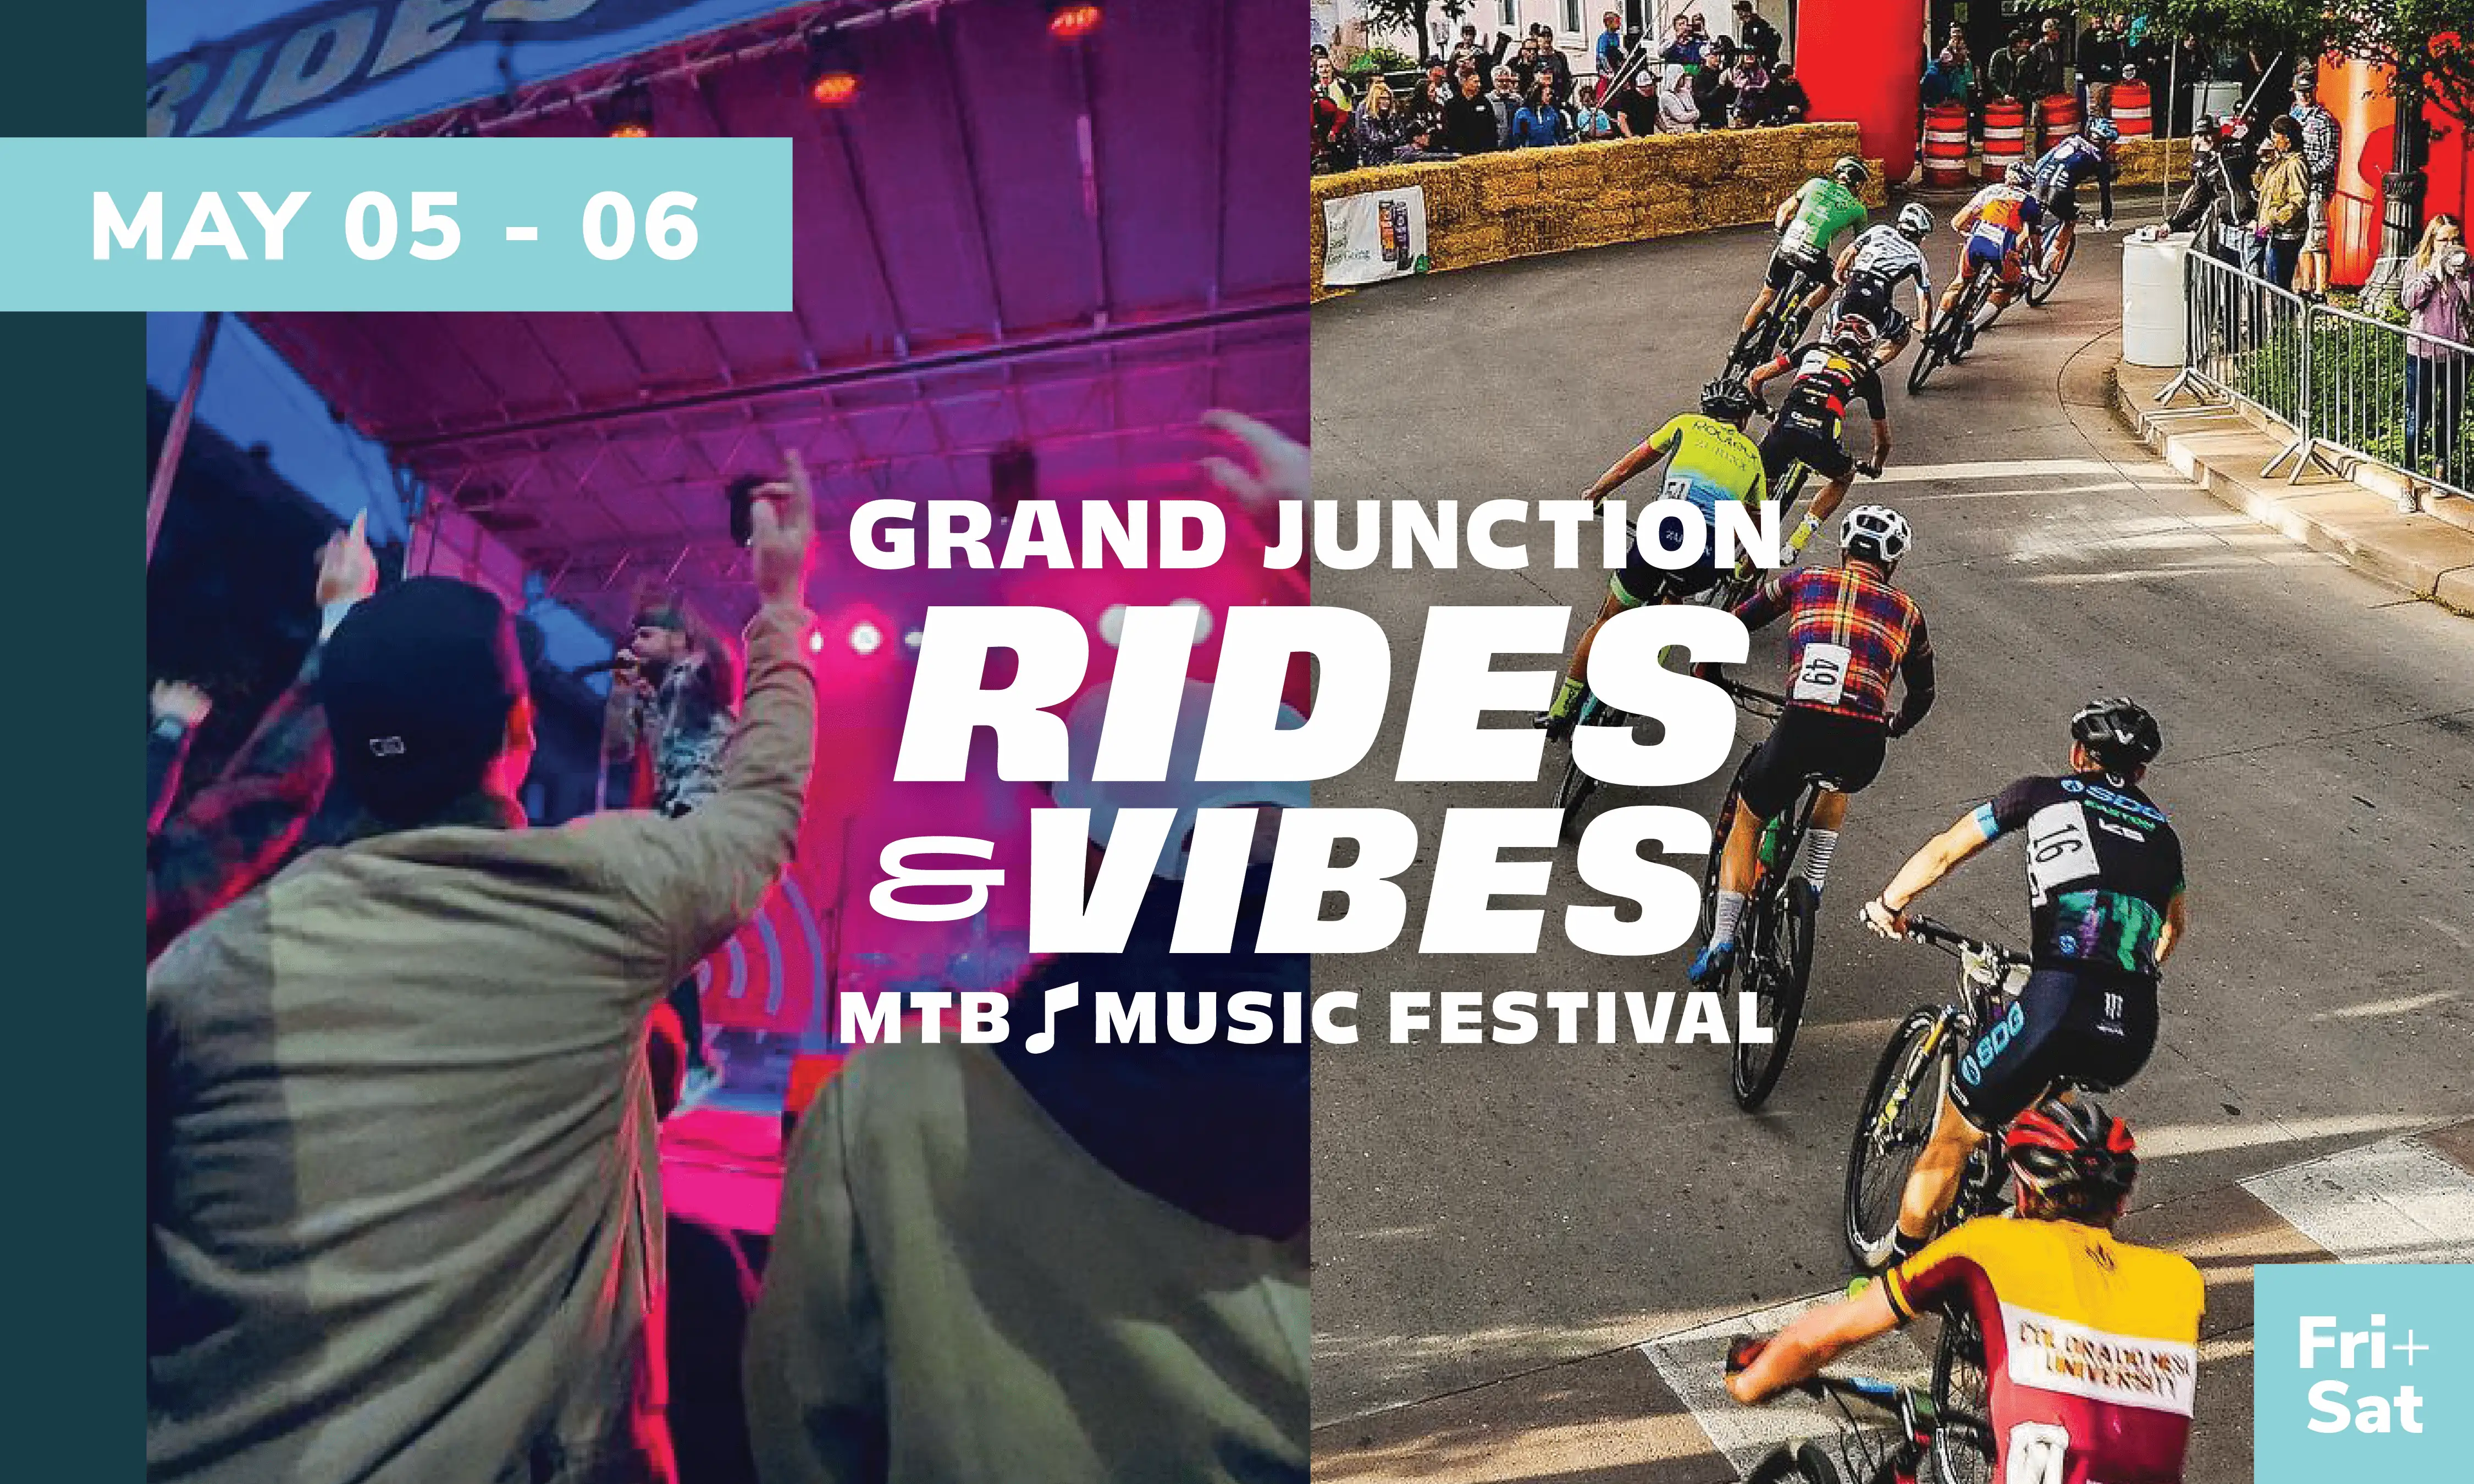 Grand Junction Rides & Vibes